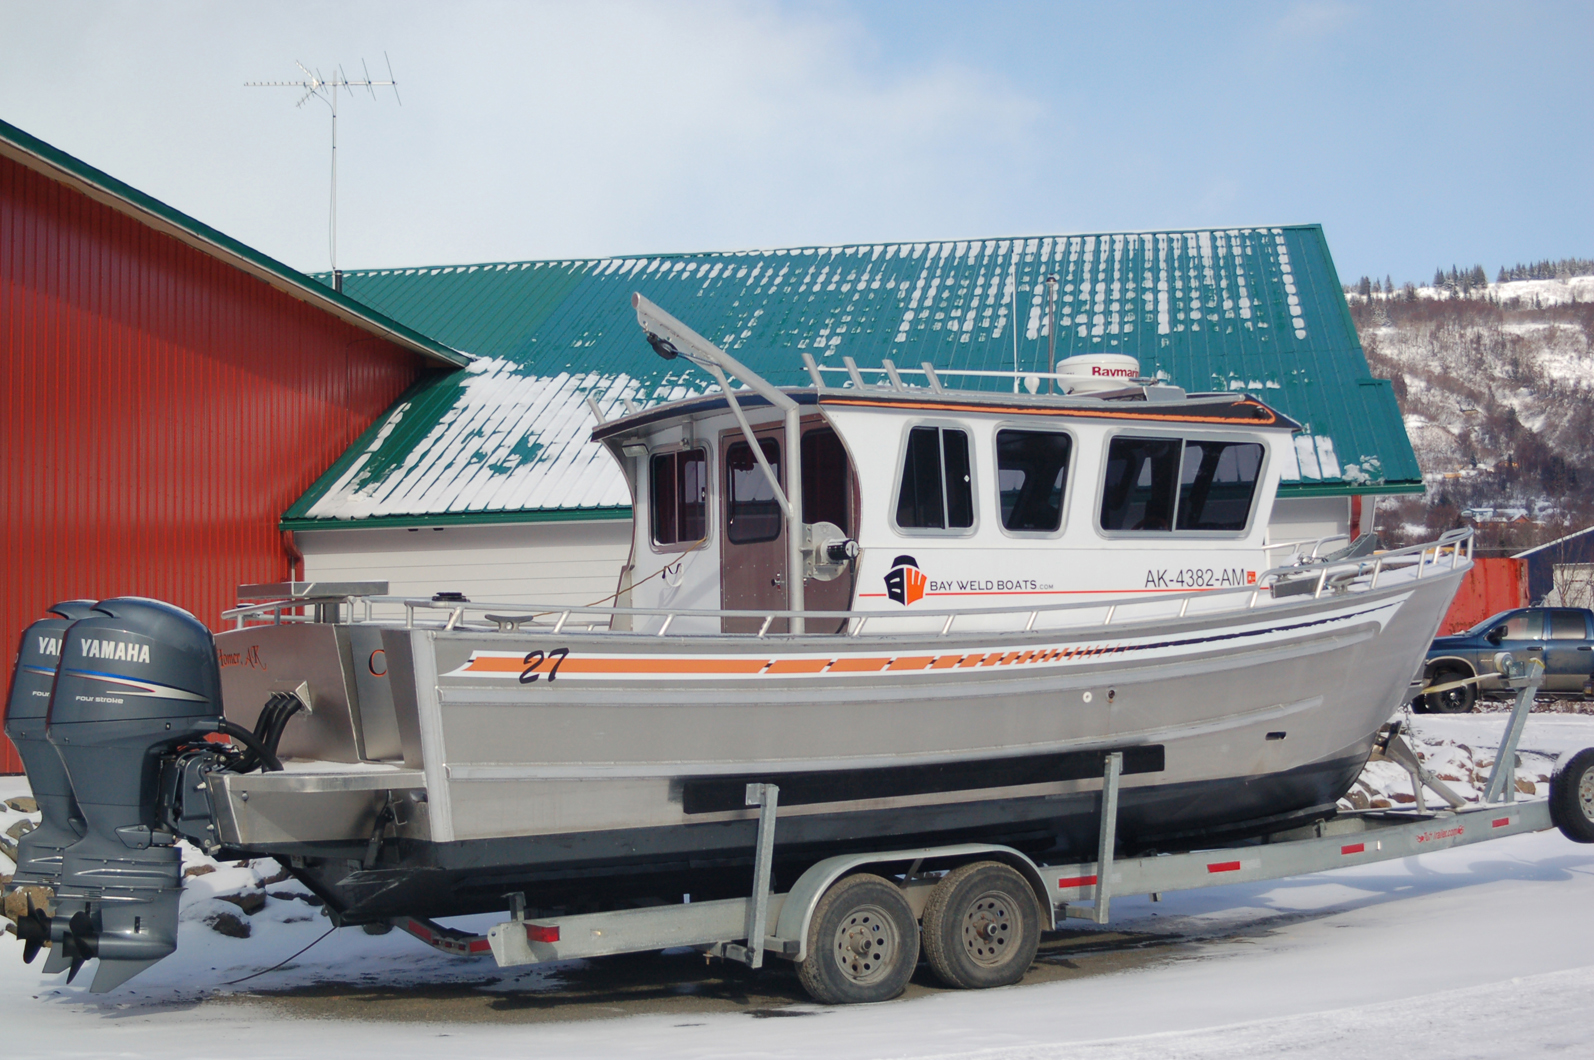 A 27-foot Bay Weld boat sits outside the Bay Welding shop on East End Road.-Photo by Michael Armstrong, Homer News